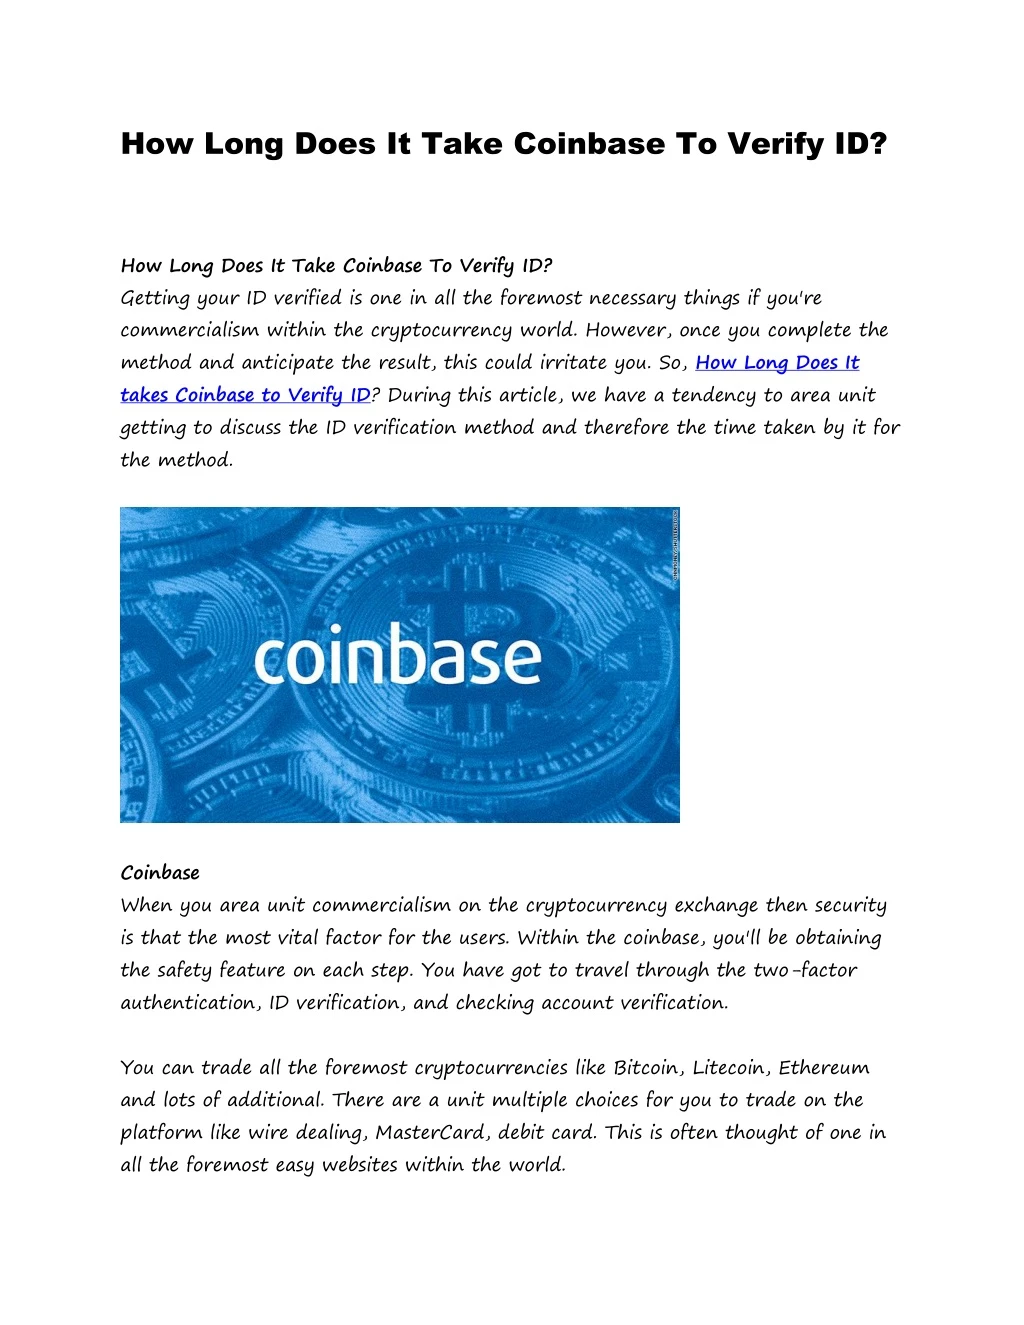 how long does it take coinbase to verify id